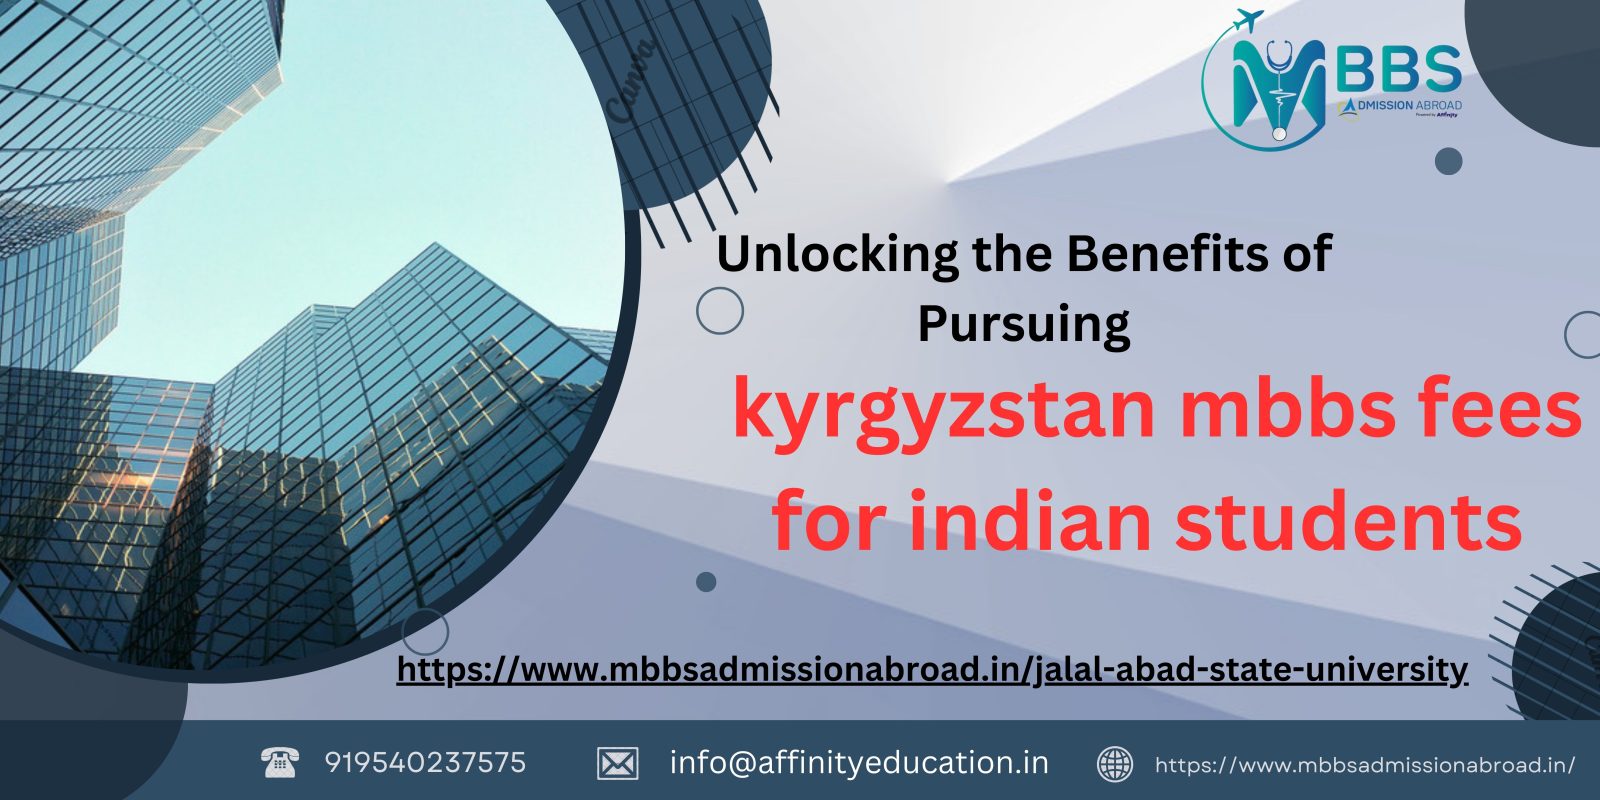 Unlocking the Benefits of Pursuing MBBS in Kyrgyzstan